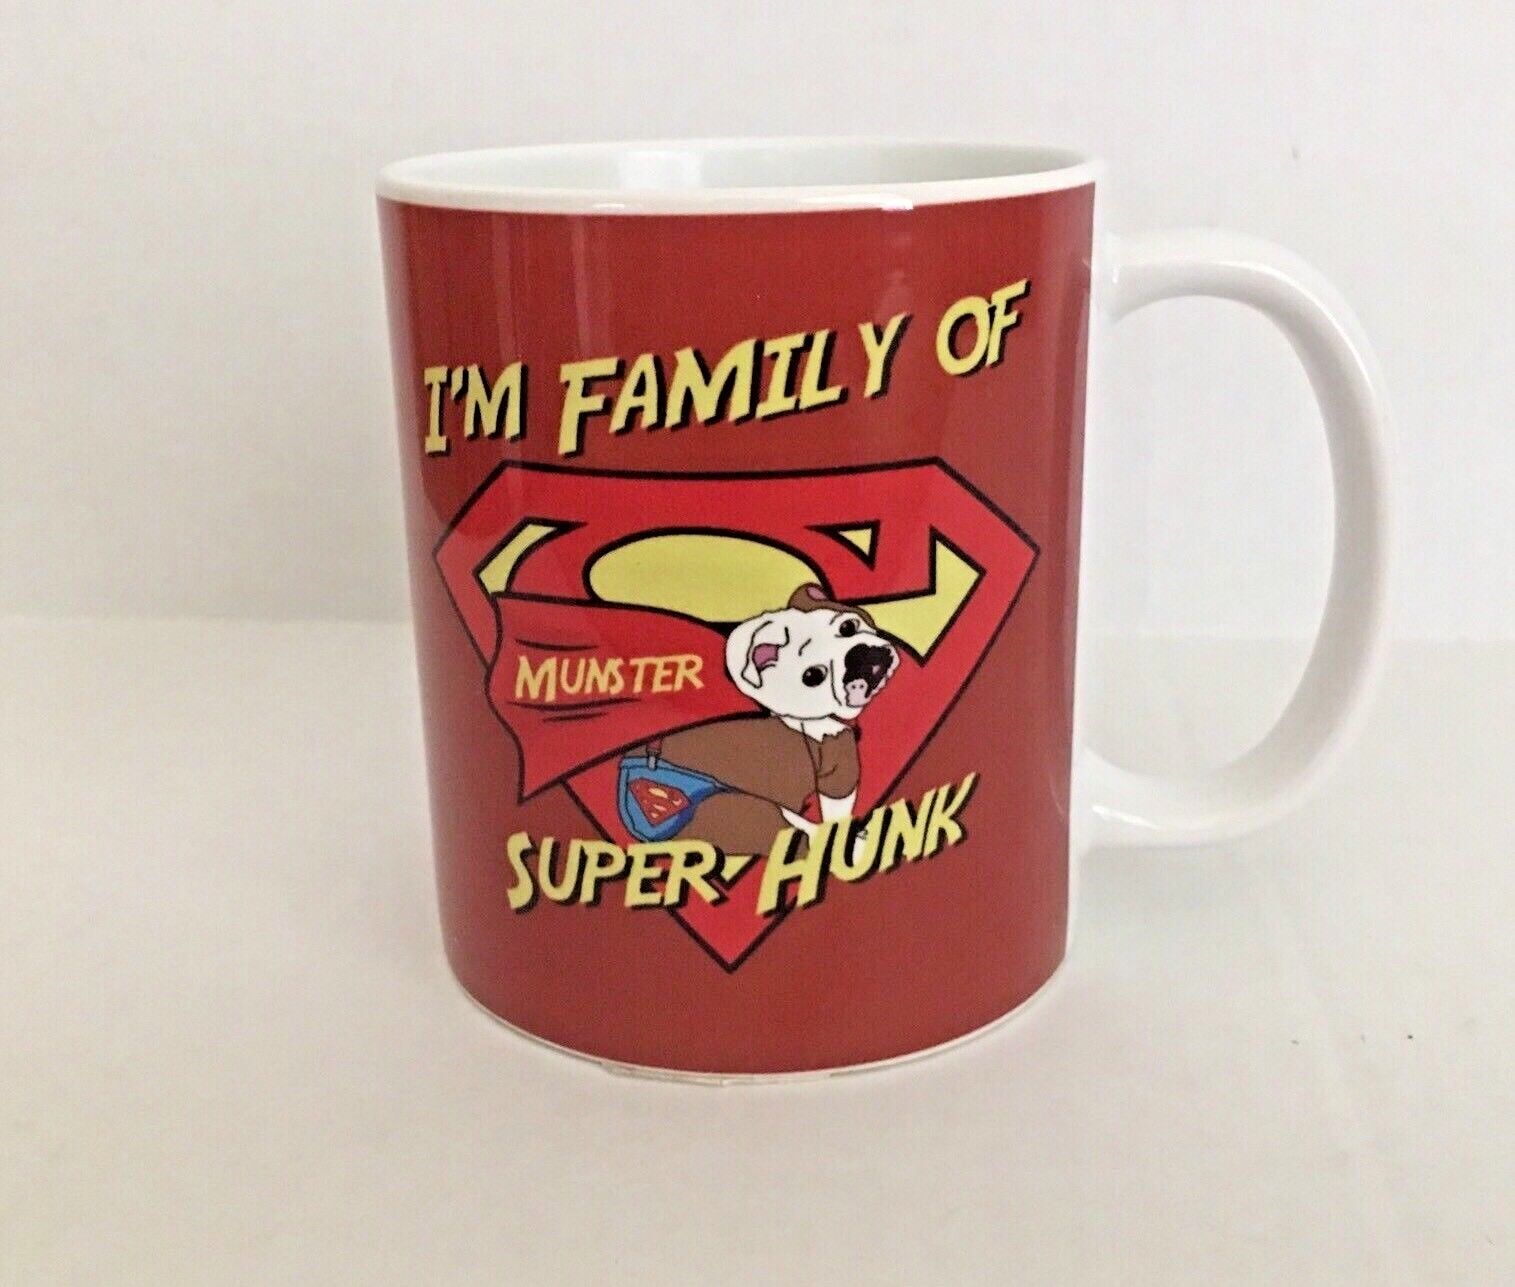 SUPER HUNK MUNSTER Mr. Fancy Pants Red Ceramic Coffee Mug Great Condition